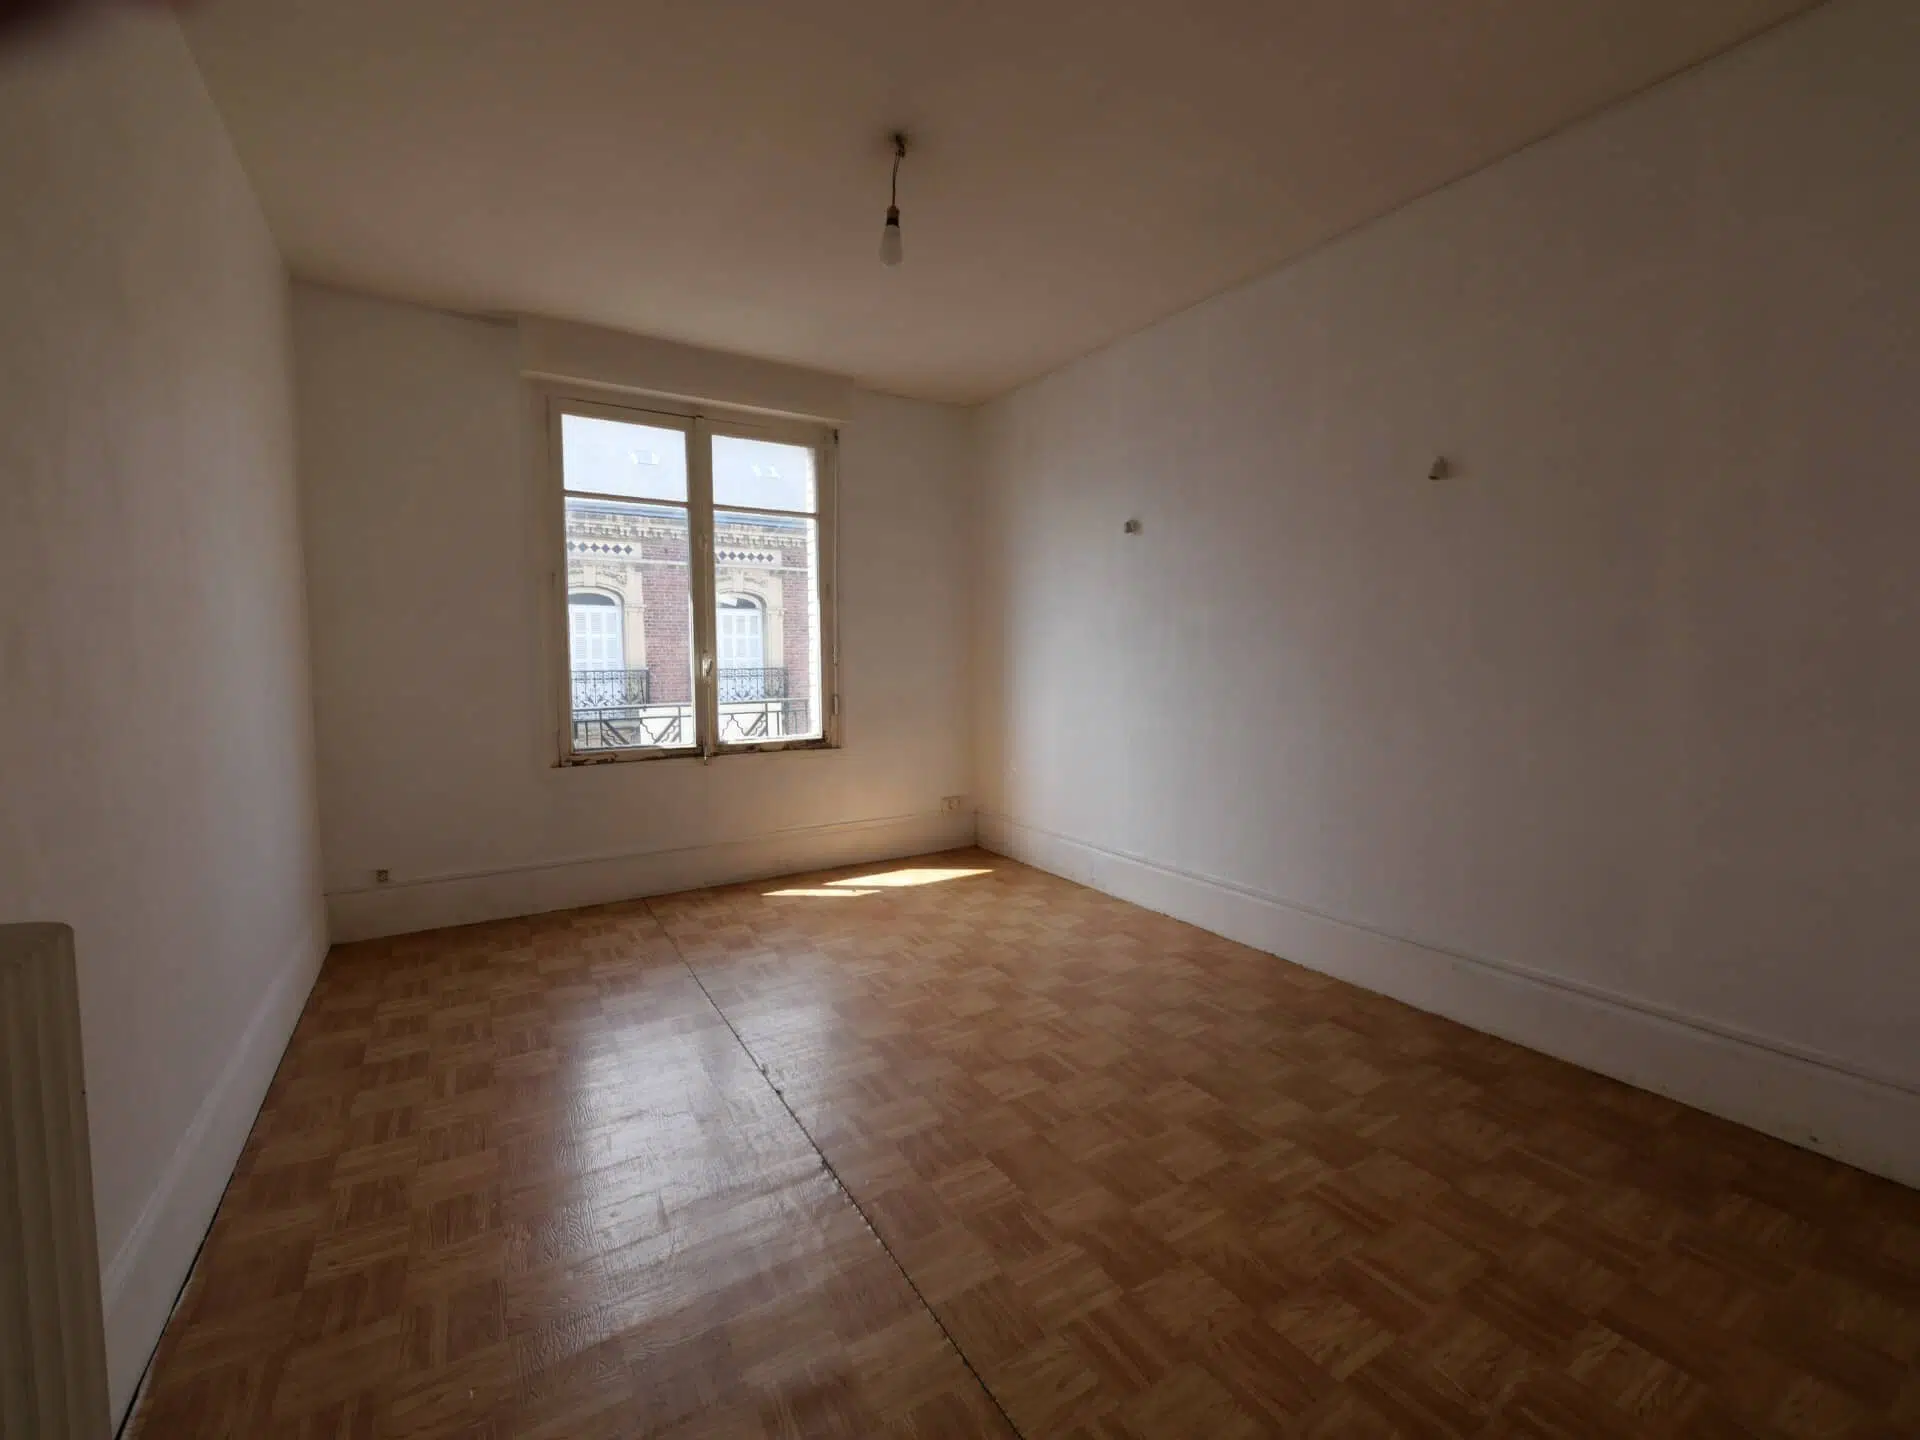 Location Appartement type F2 Le Havre 2069